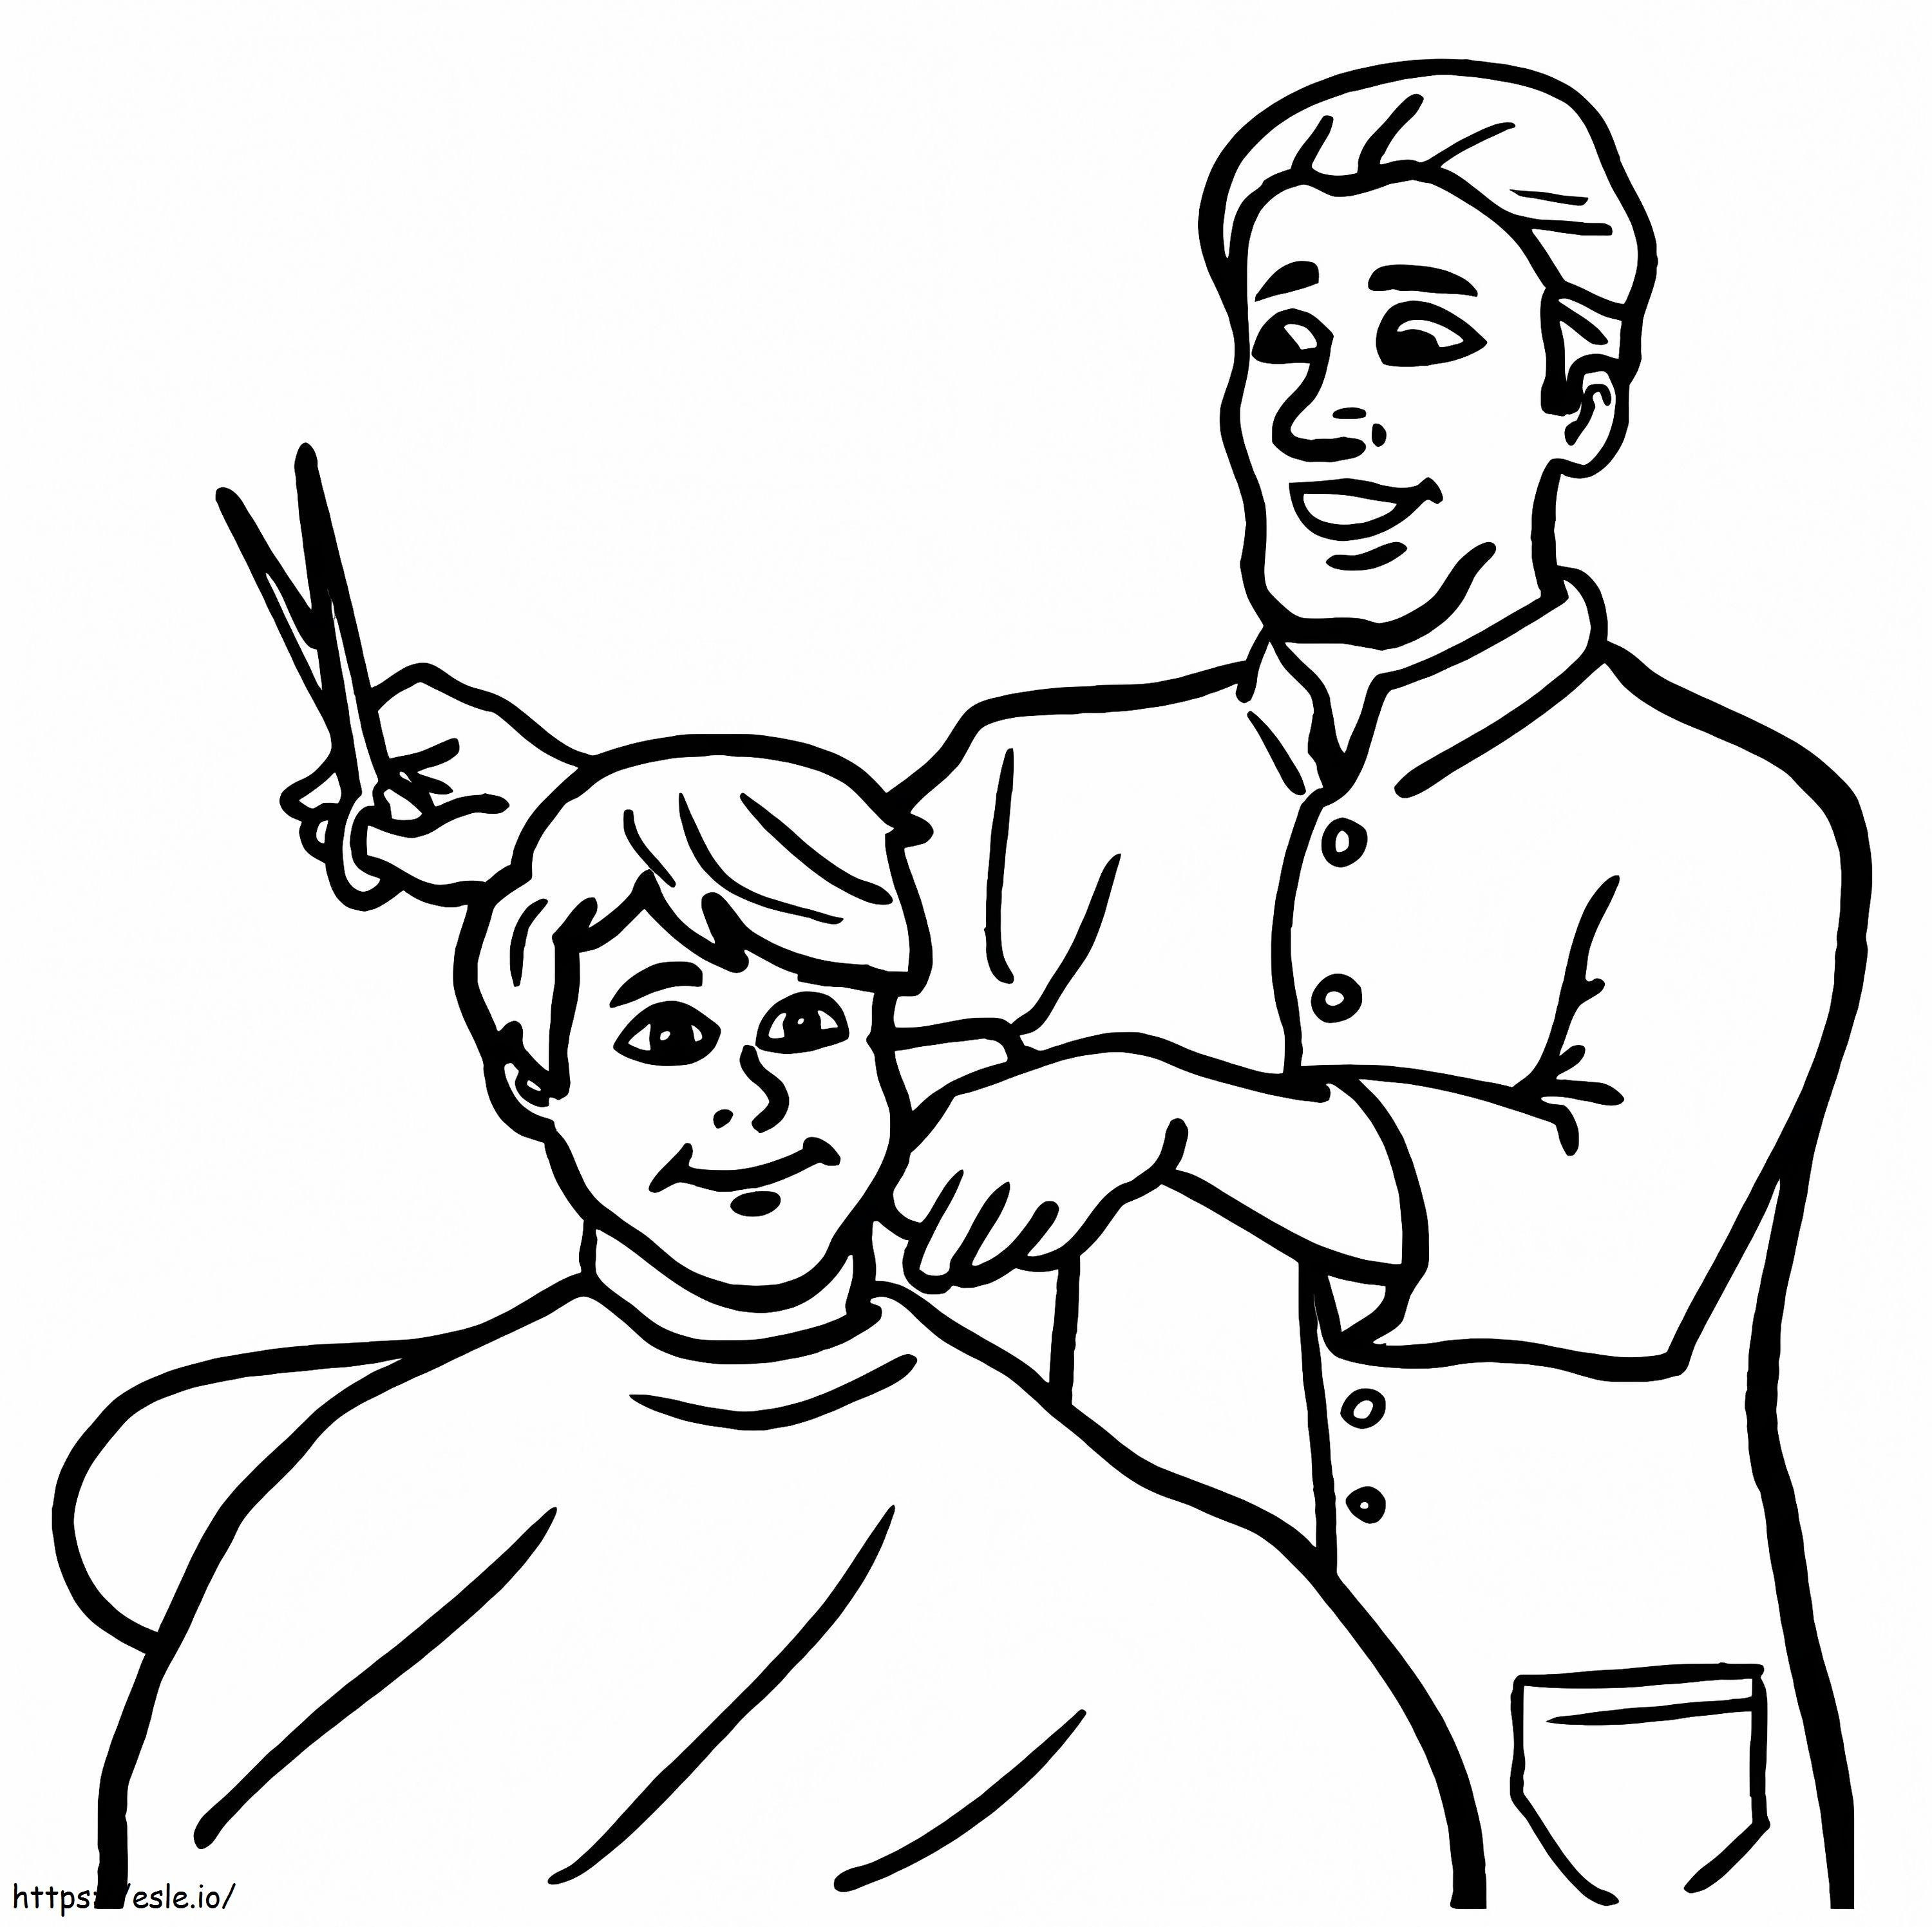 barber coloring pages